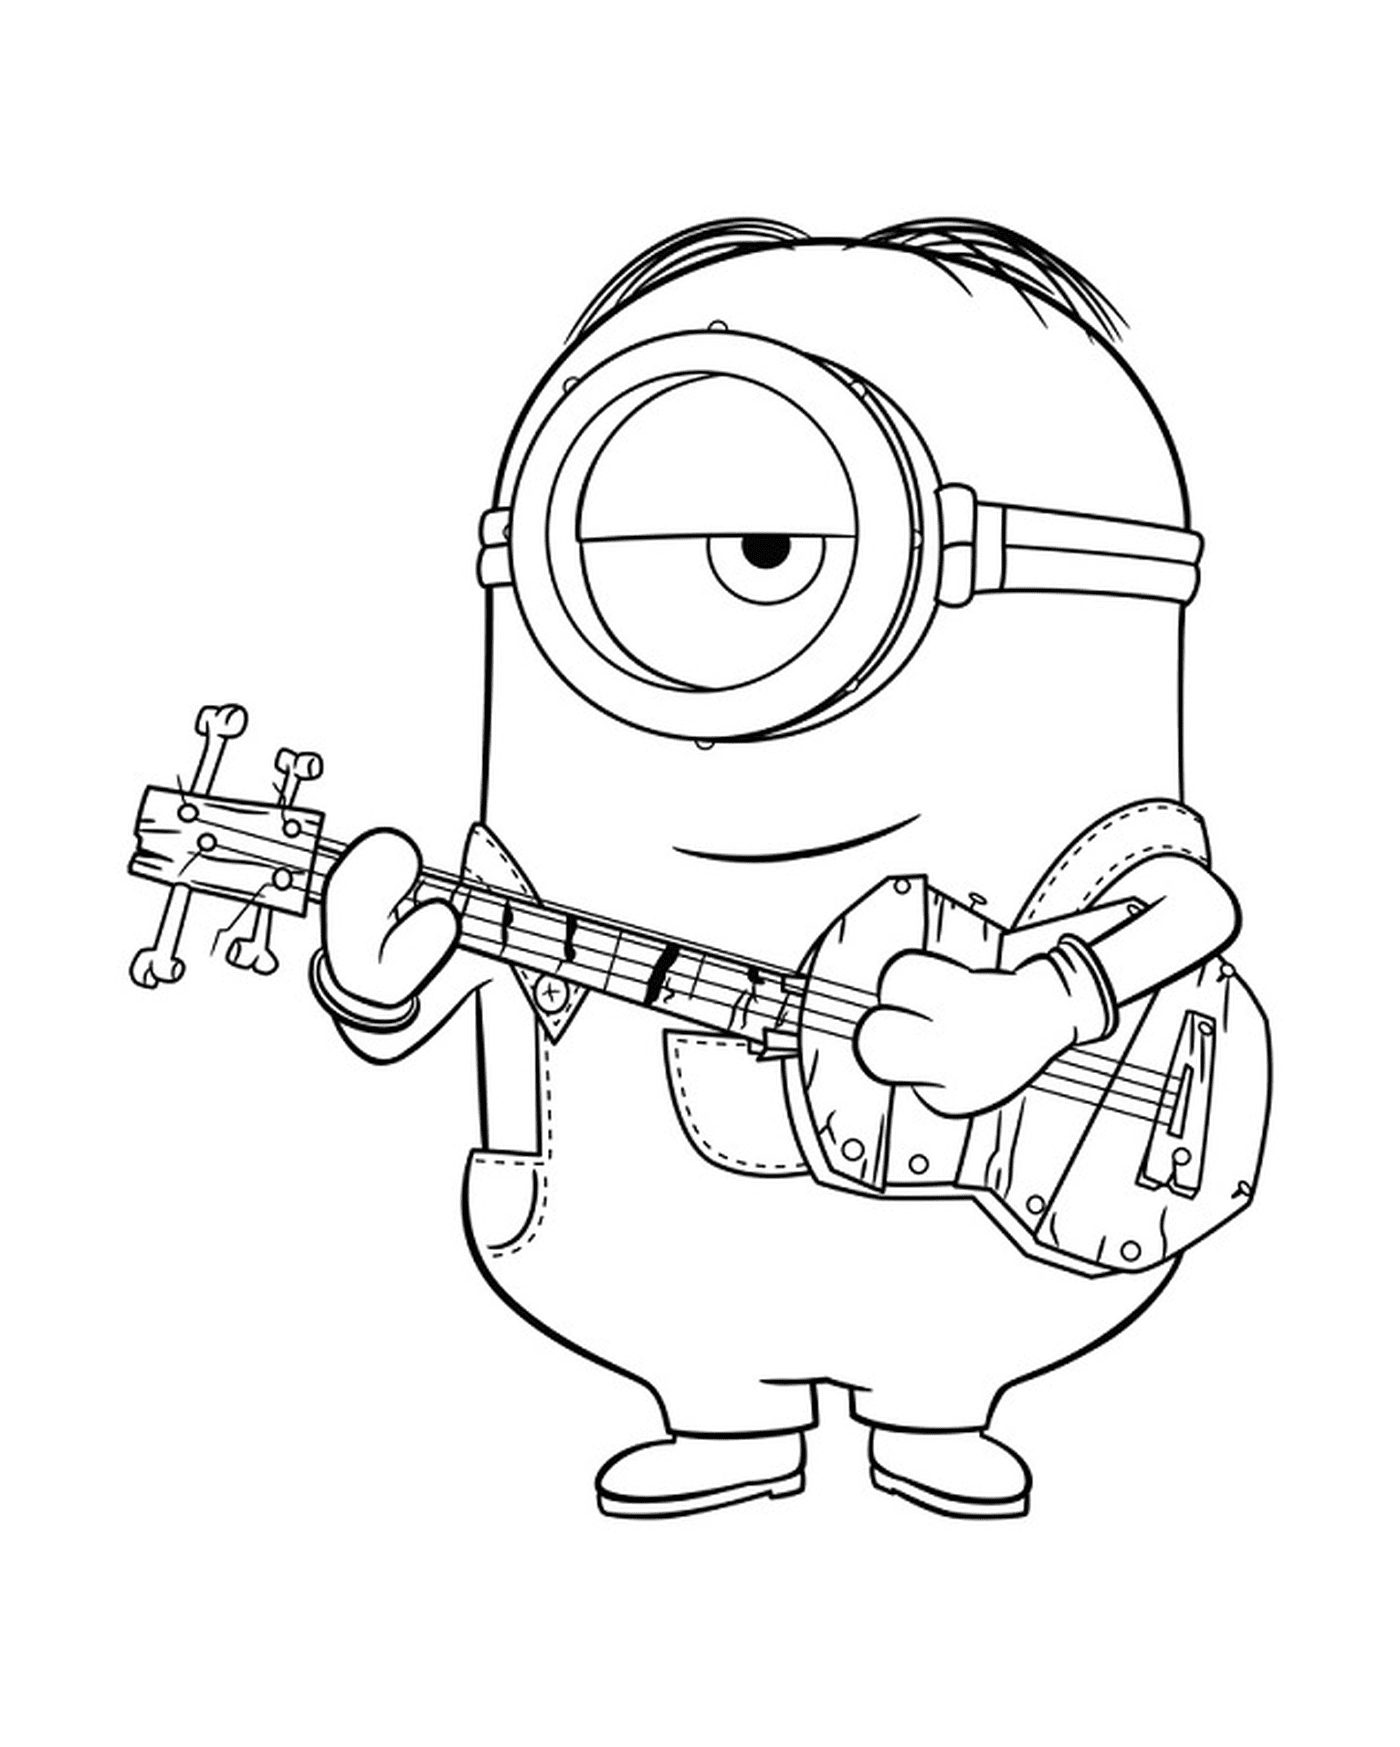  Minion plays guitar, Moi Moche and Bad 